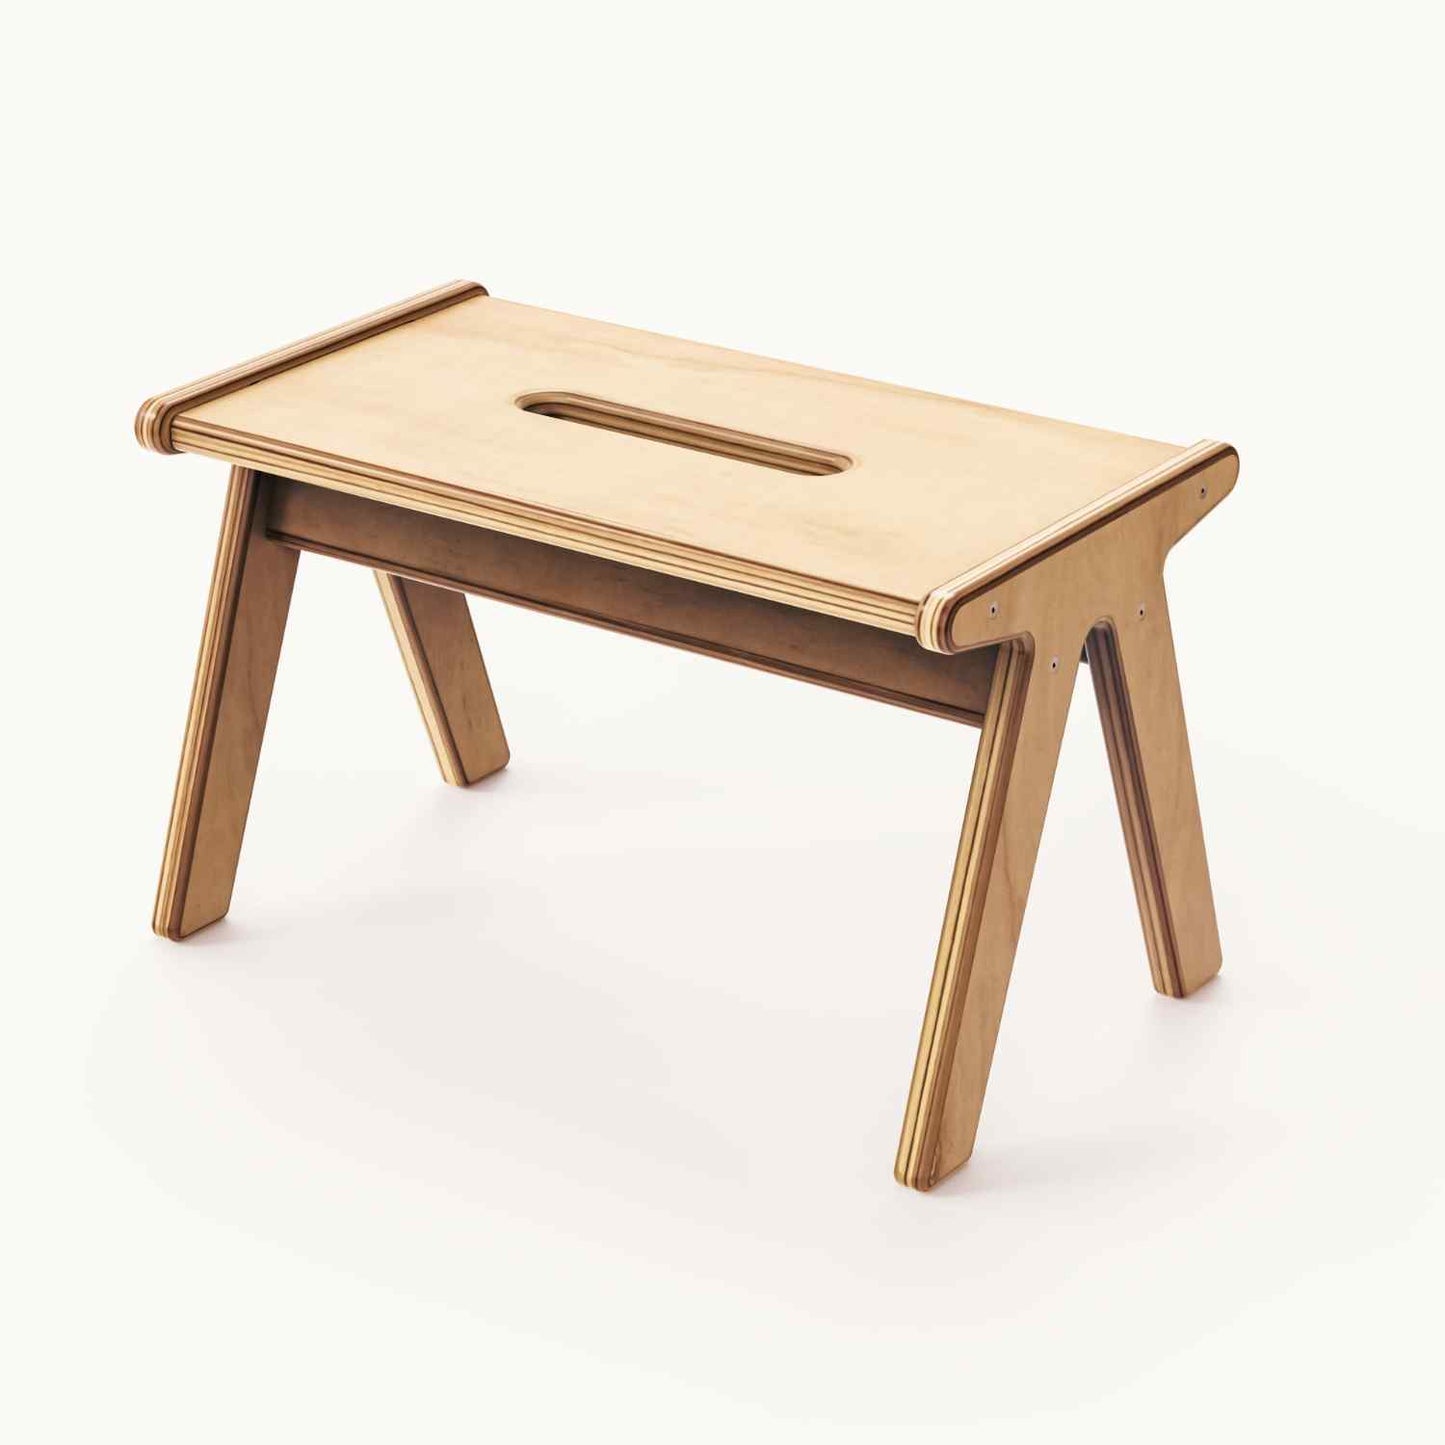 Wooden One Step Stools For Kids